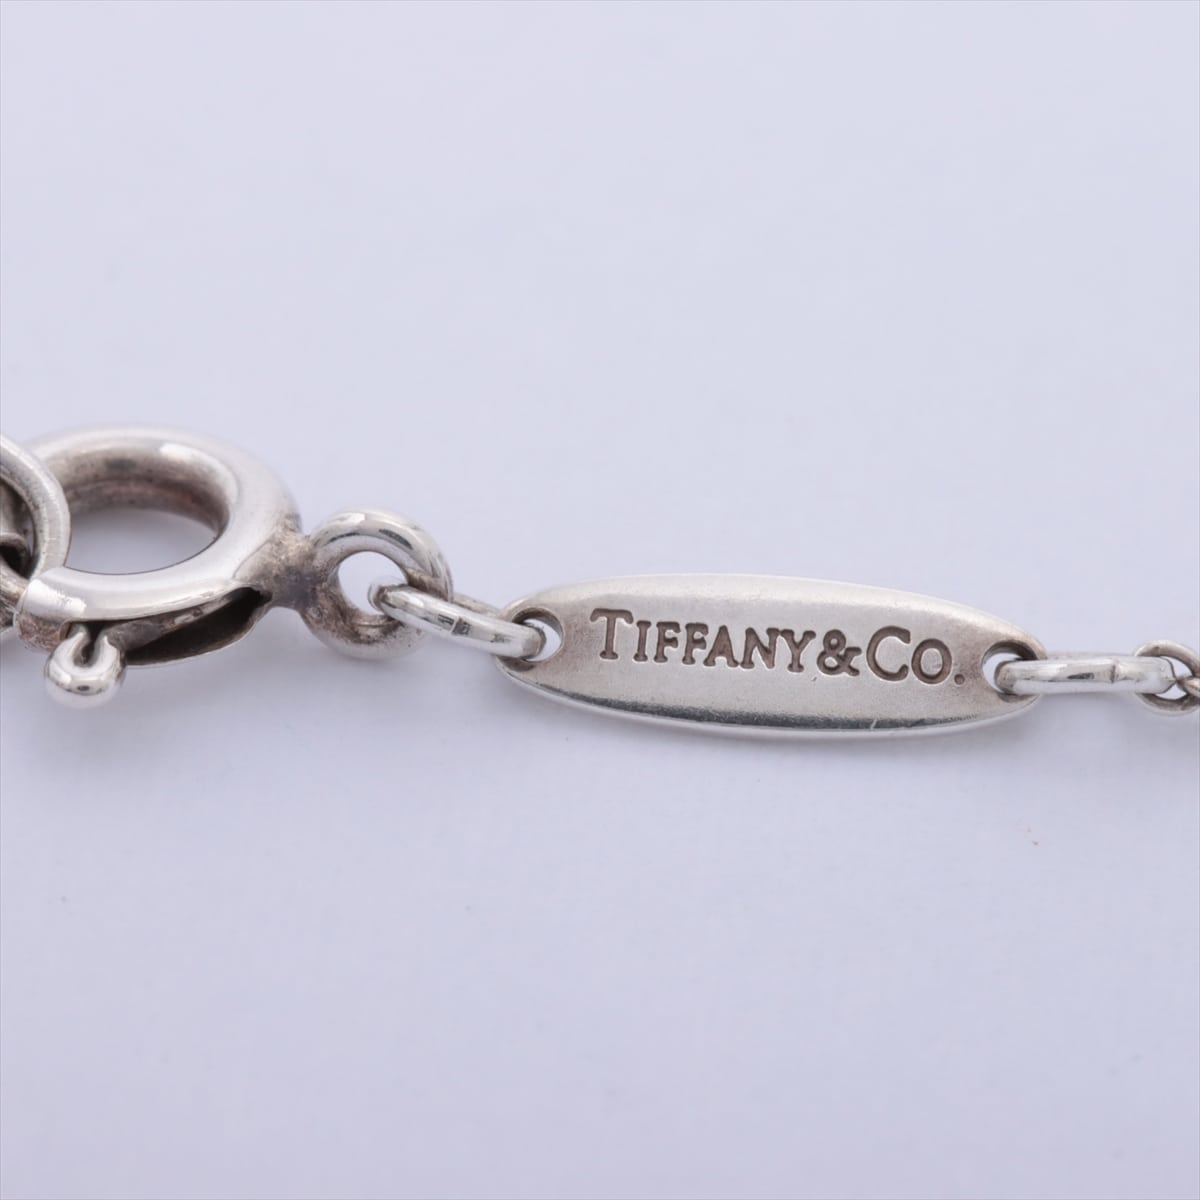 Tiffany Open Heart Necklace 925 2.1g Silver